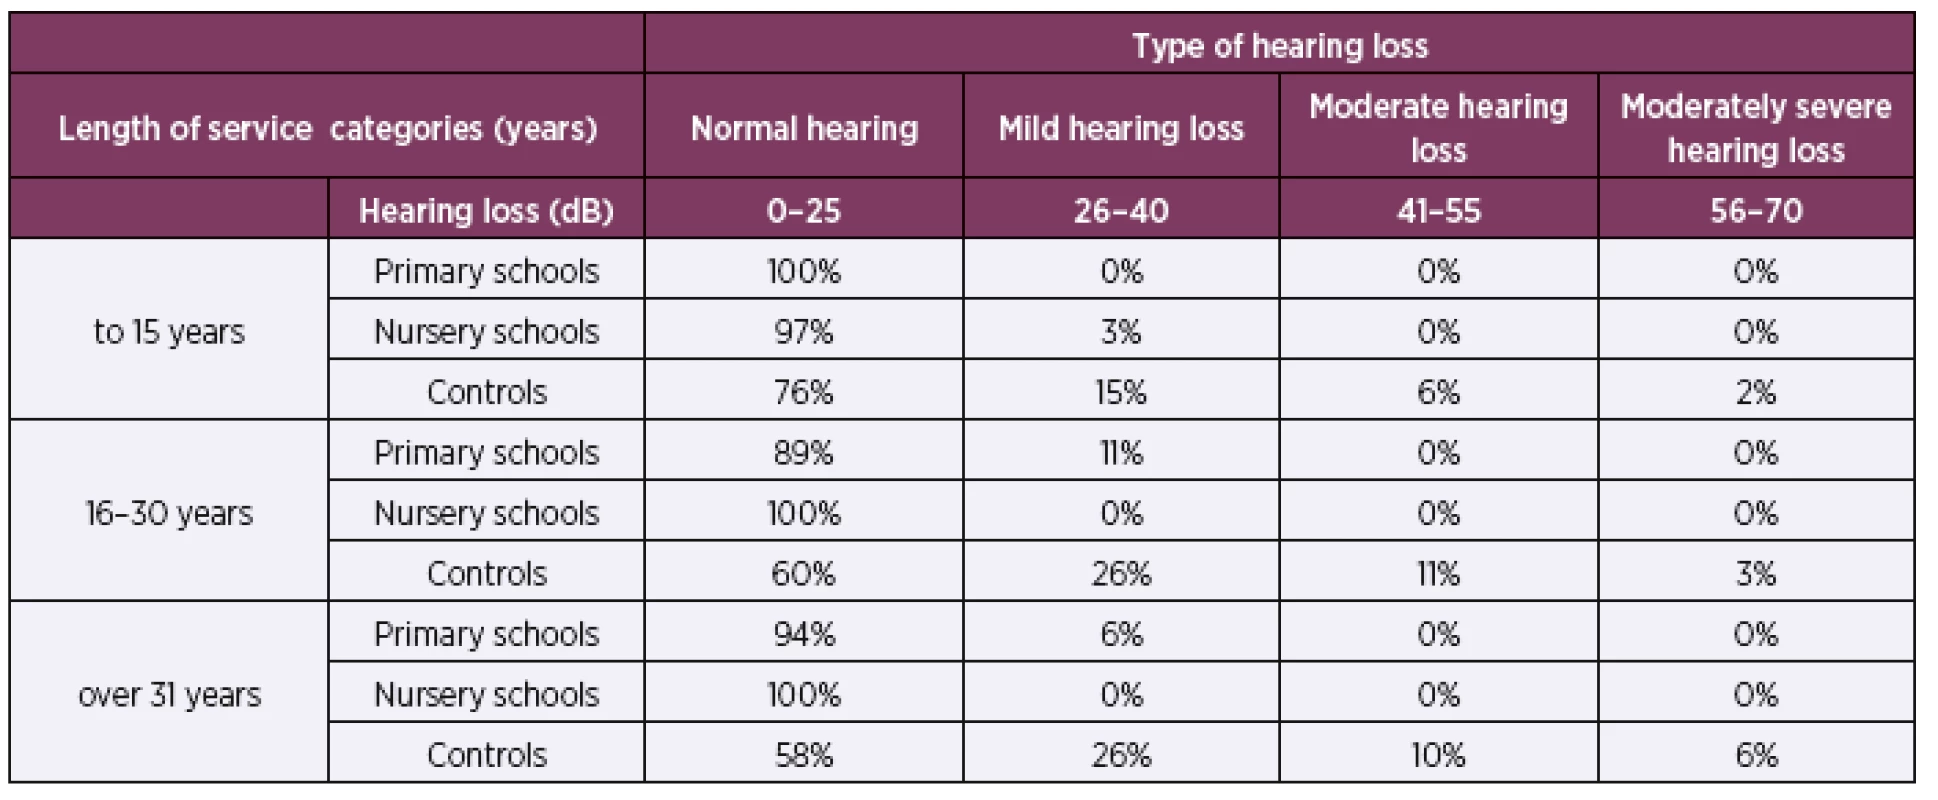 Prevalence of hearing loss with respect to respondents’ length of service